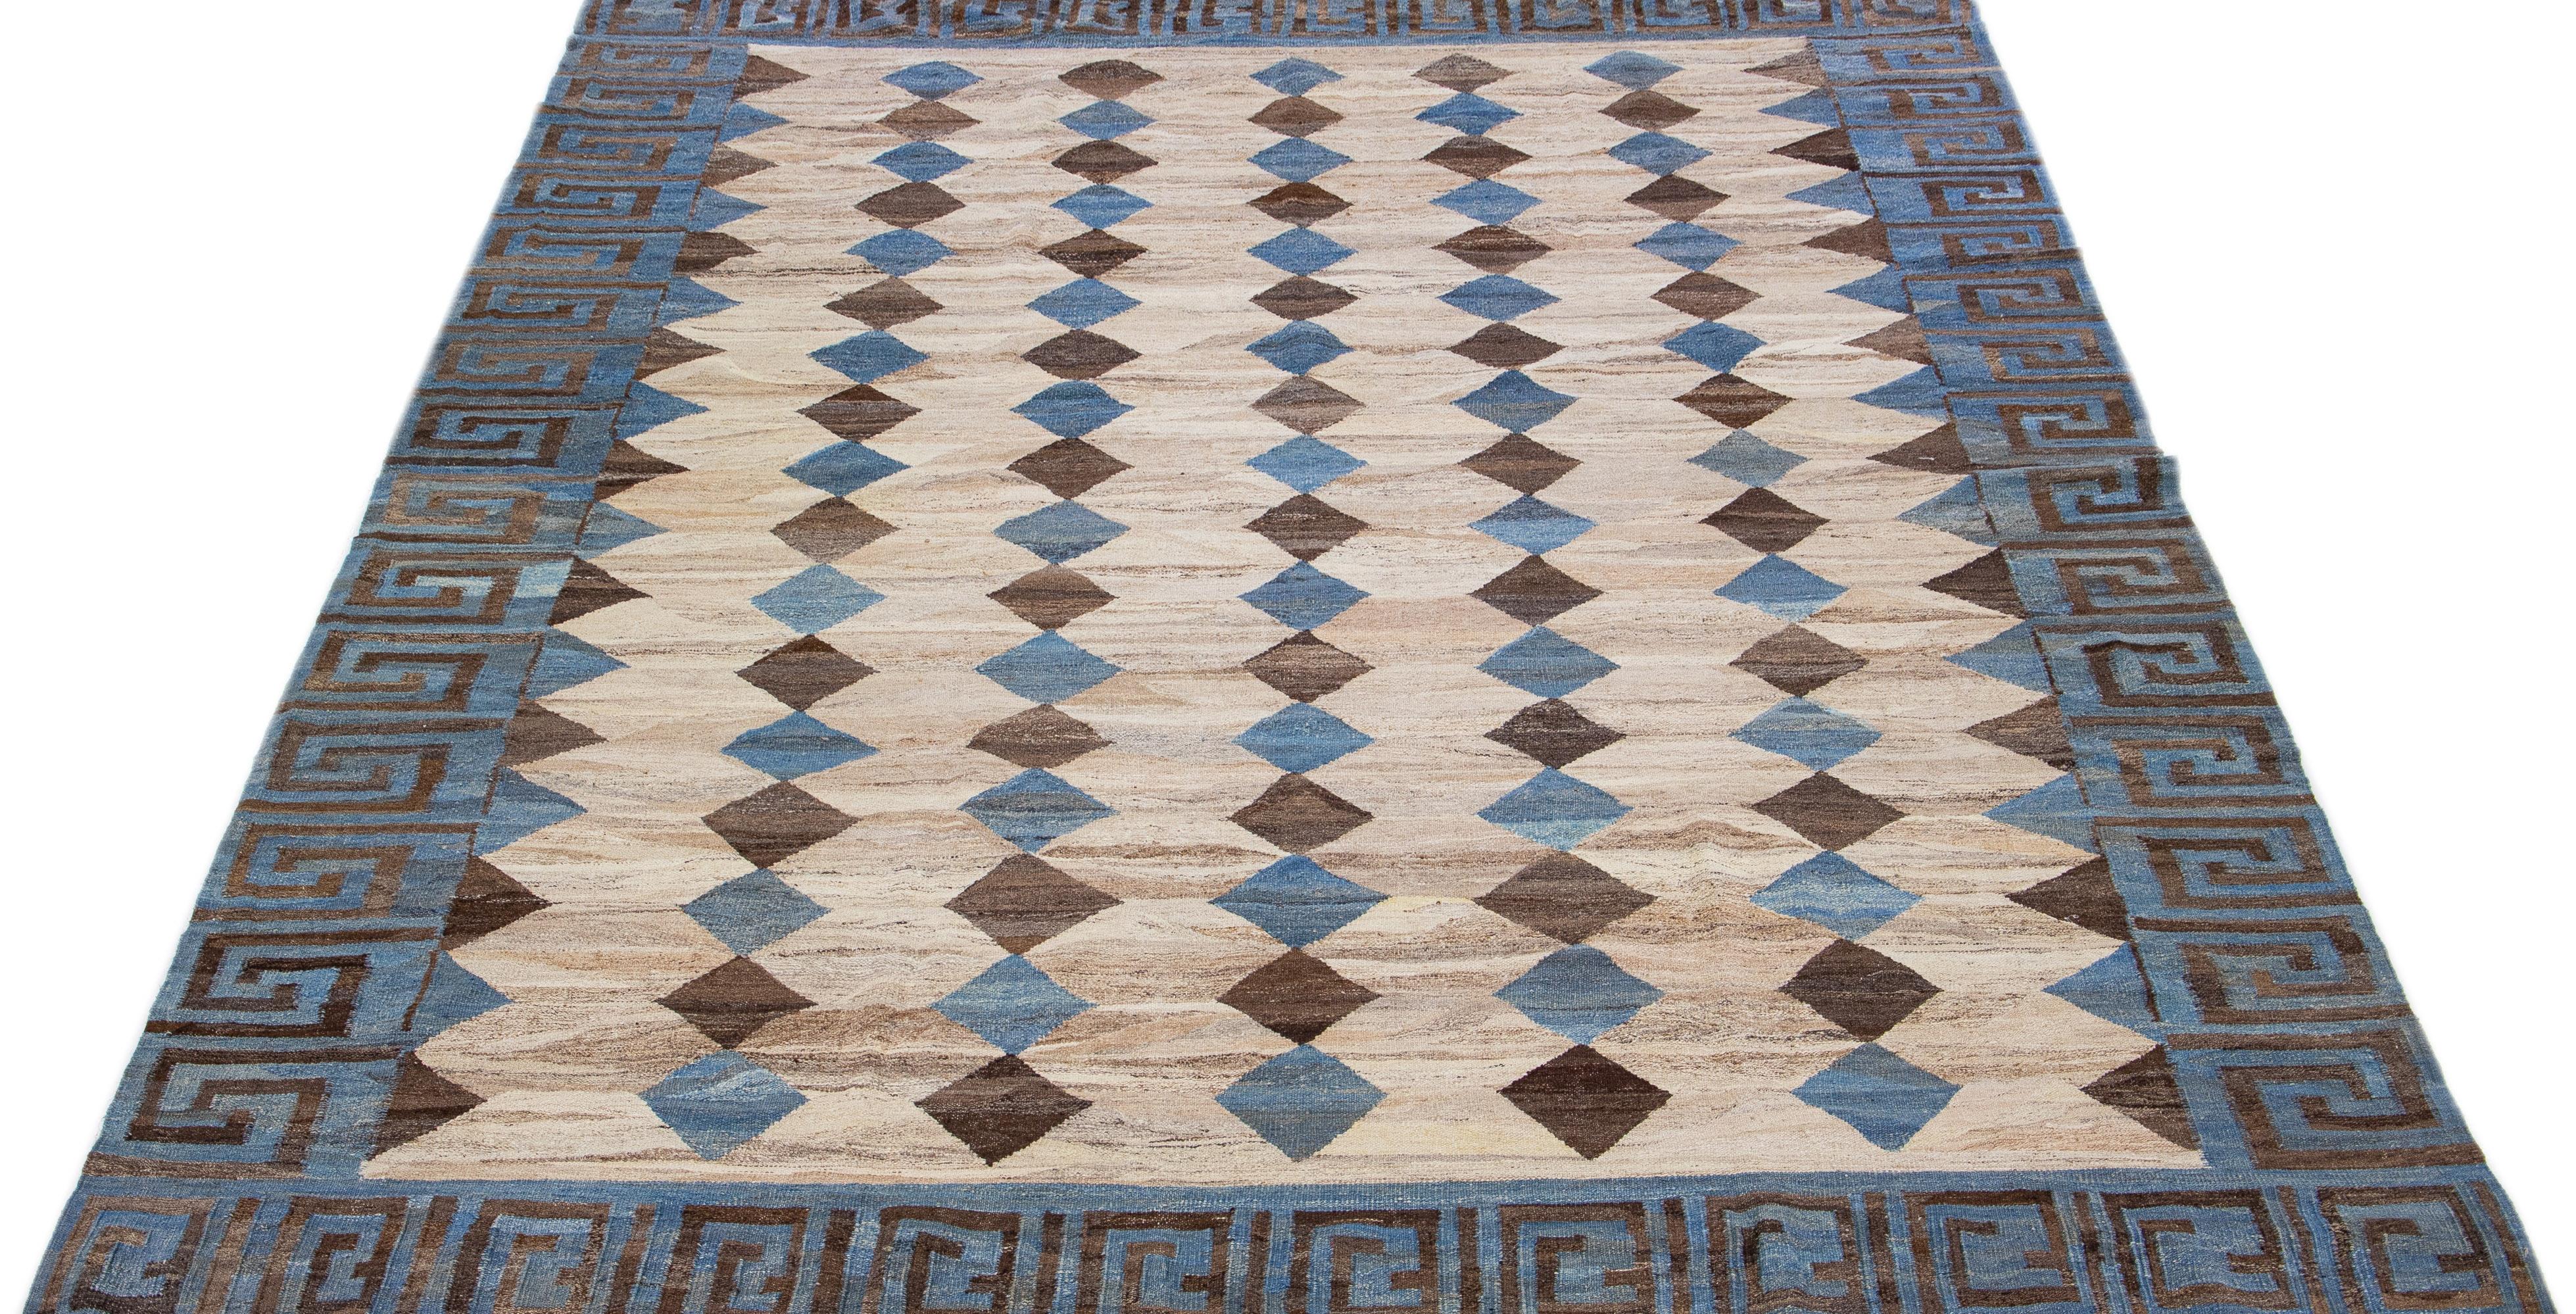 This Deco flatweave wool rug exhibits a fascinating beige color field with brown and beige accents, creating a contemporary and aesthetically-pleasing abstract design. The natural material of the Deco wool rug is designed for comfort and